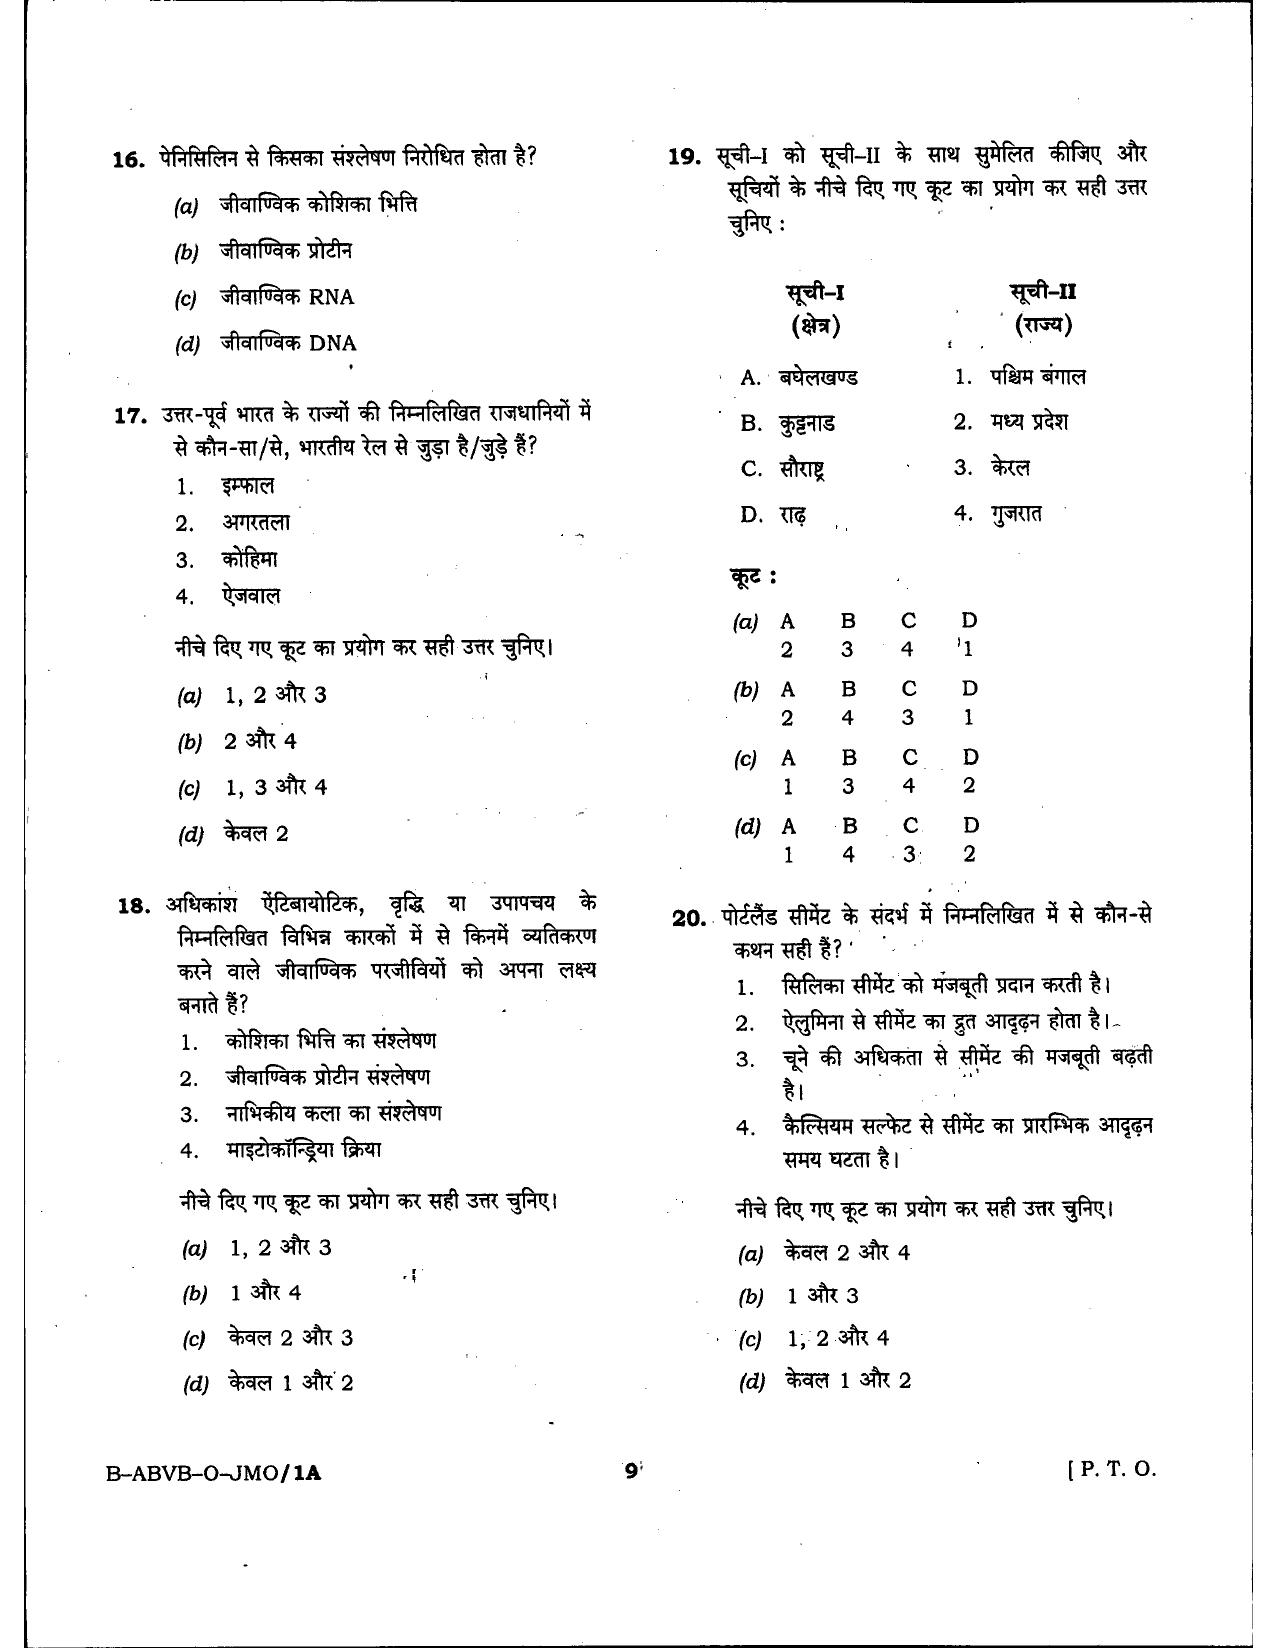 HPSSSB Fitter Model Papers: General Knowledge - Page 9